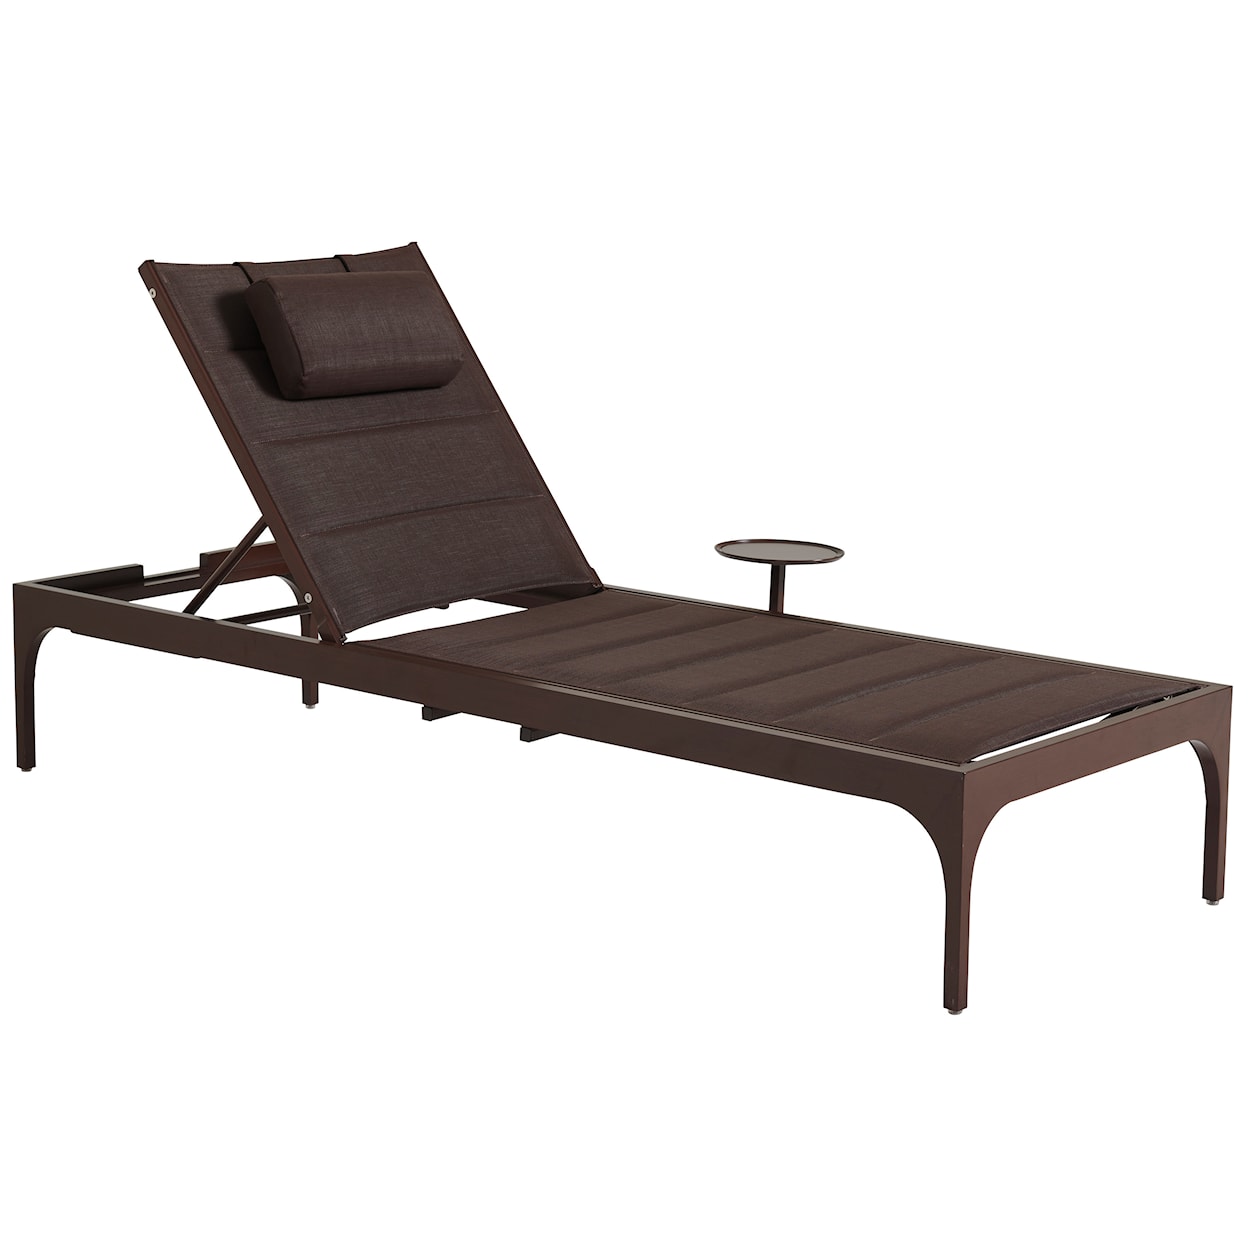 Tommy Bahama Outdoor Living Abaco Chaise